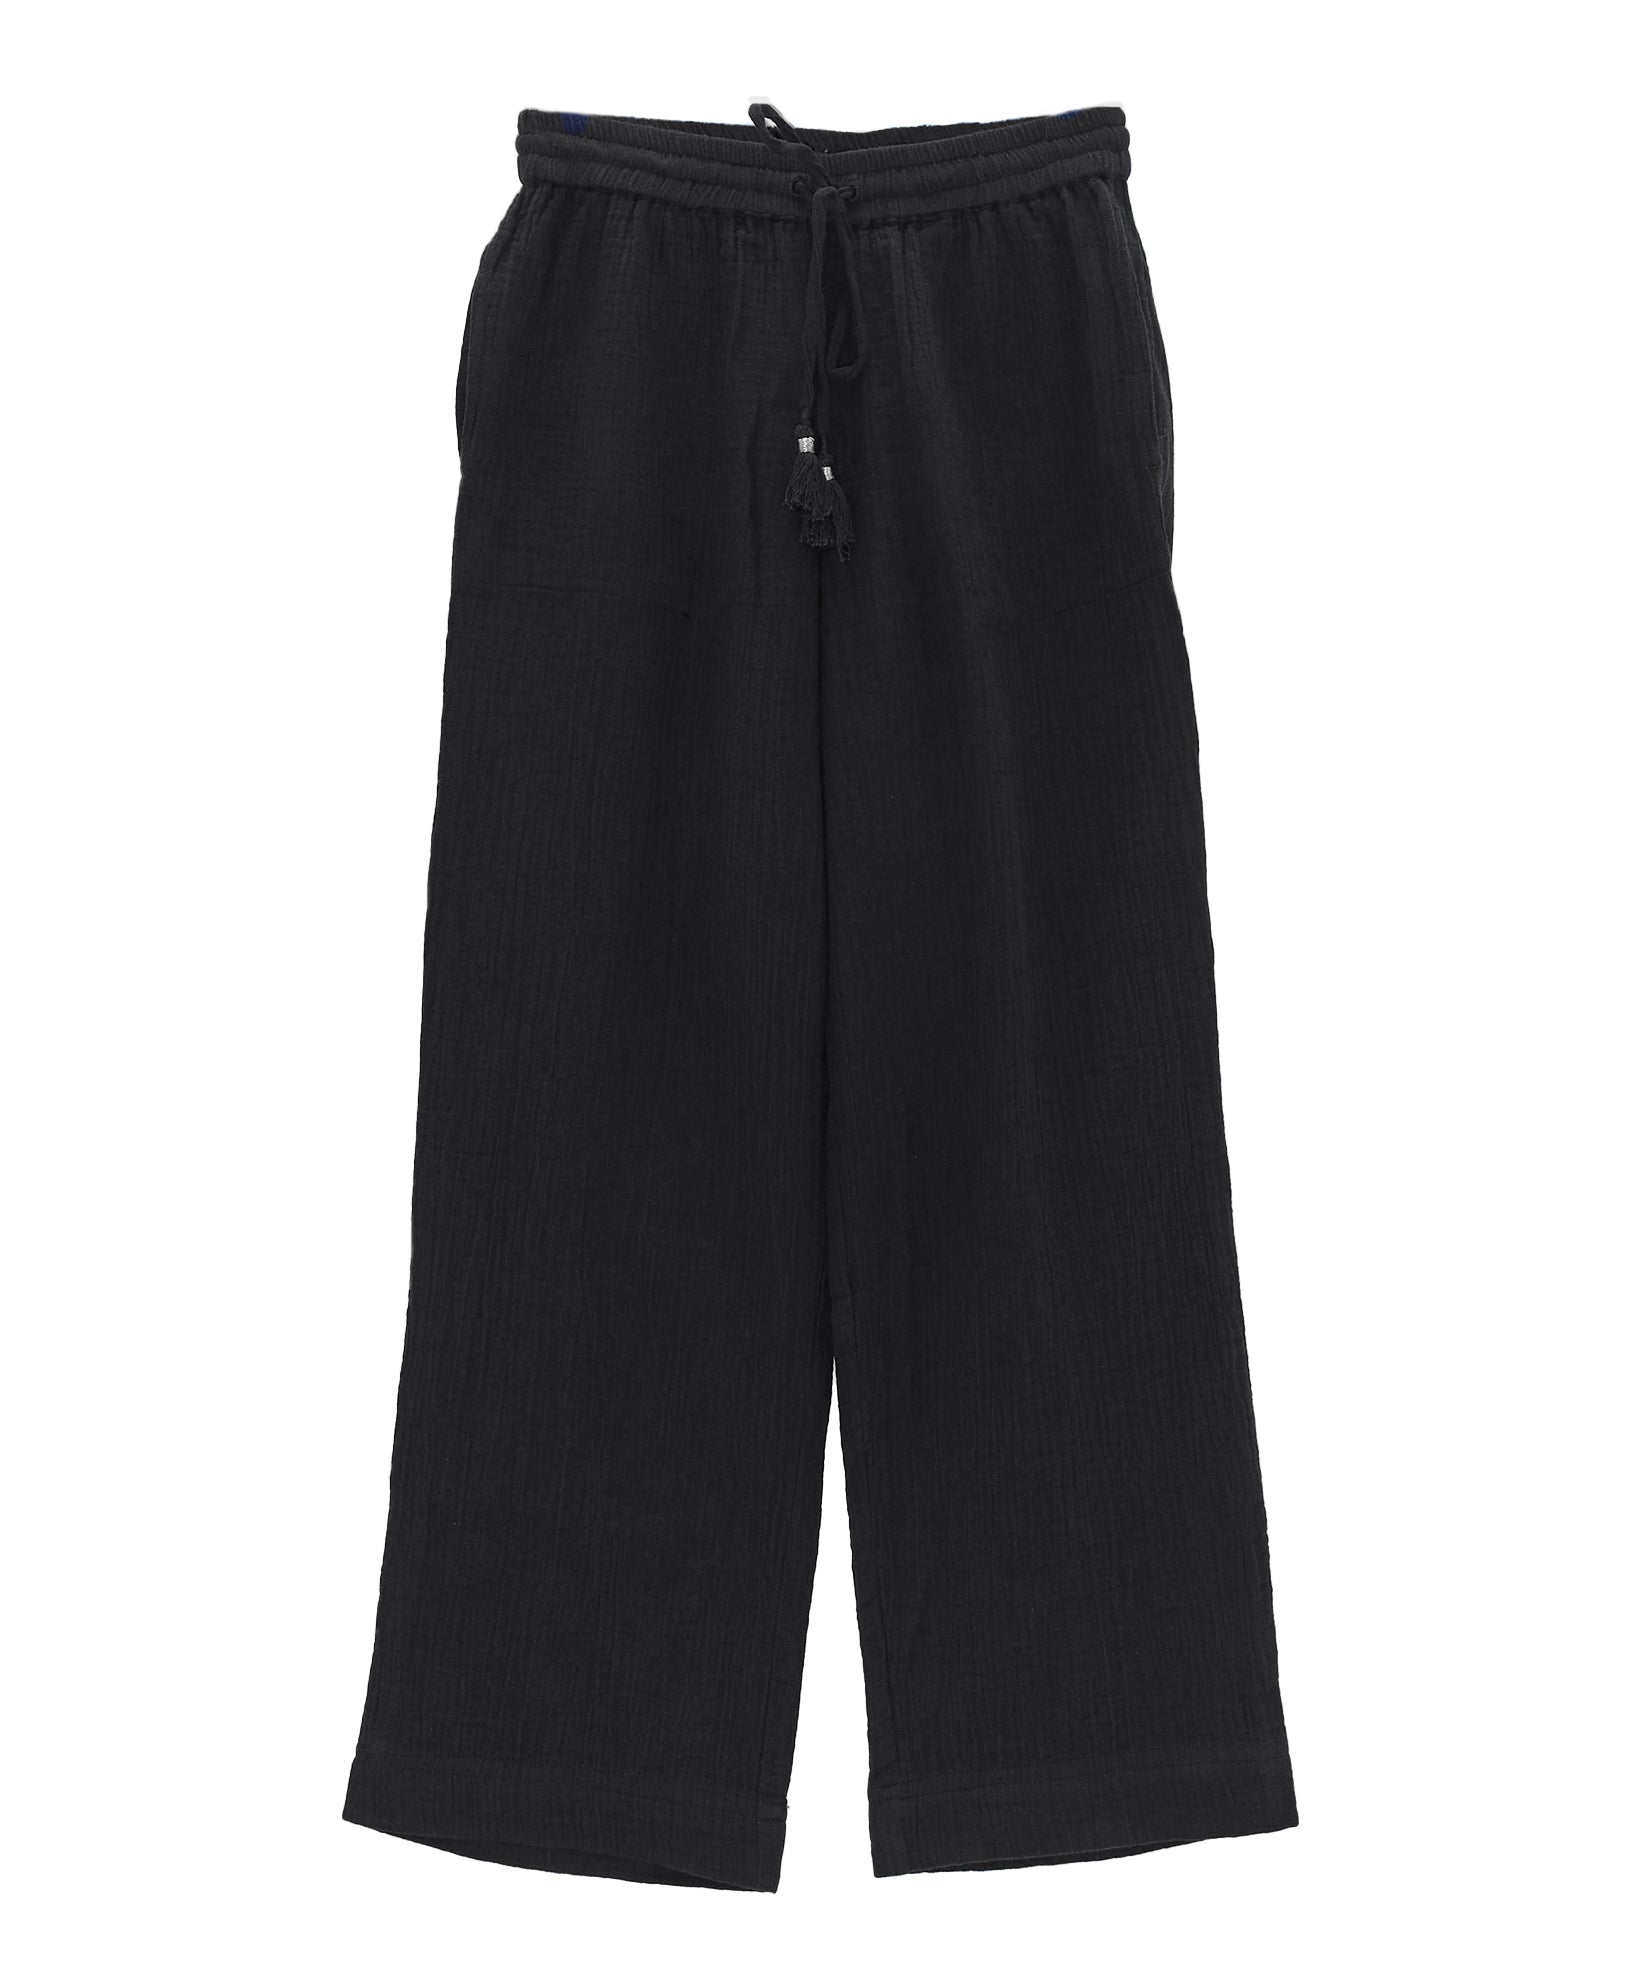 Supersoft Gauze Beach Pant in color Black